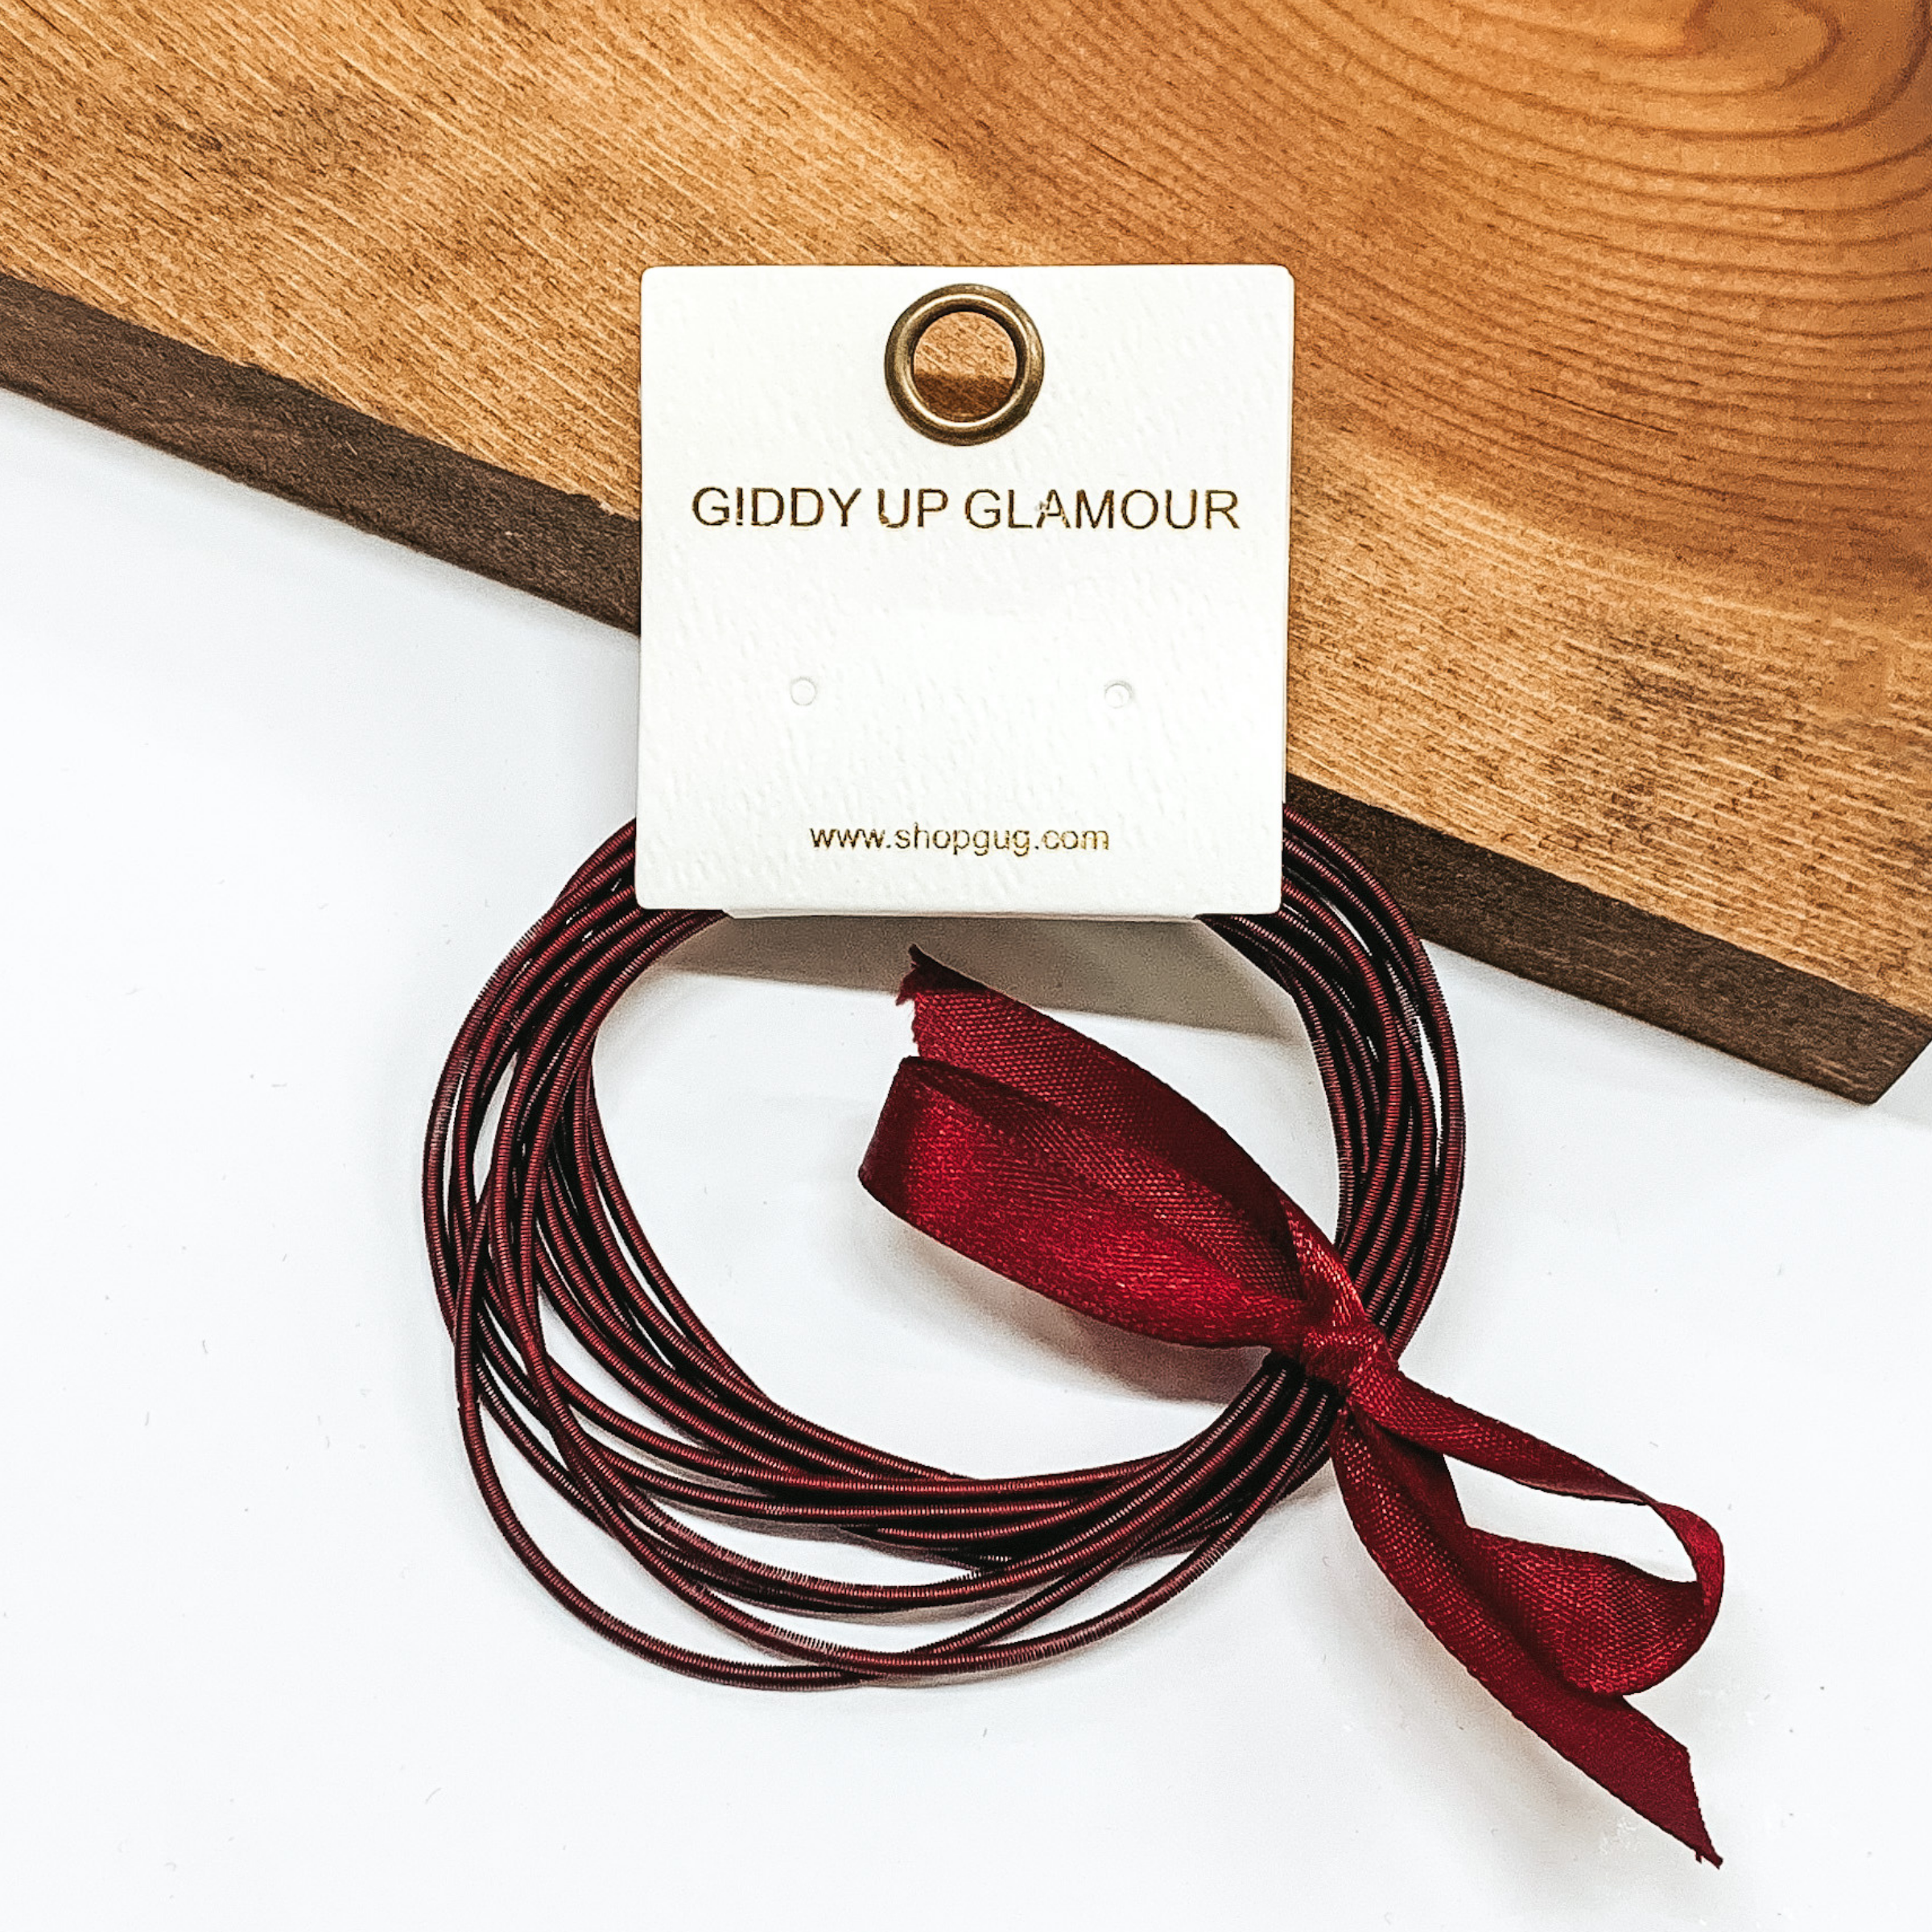 Group of maroon spring wire elastic bracelet set tied together with a maroon ribbon that is tied in a bow. This bracelet set is pictured laying against a piece of wood on a white background.